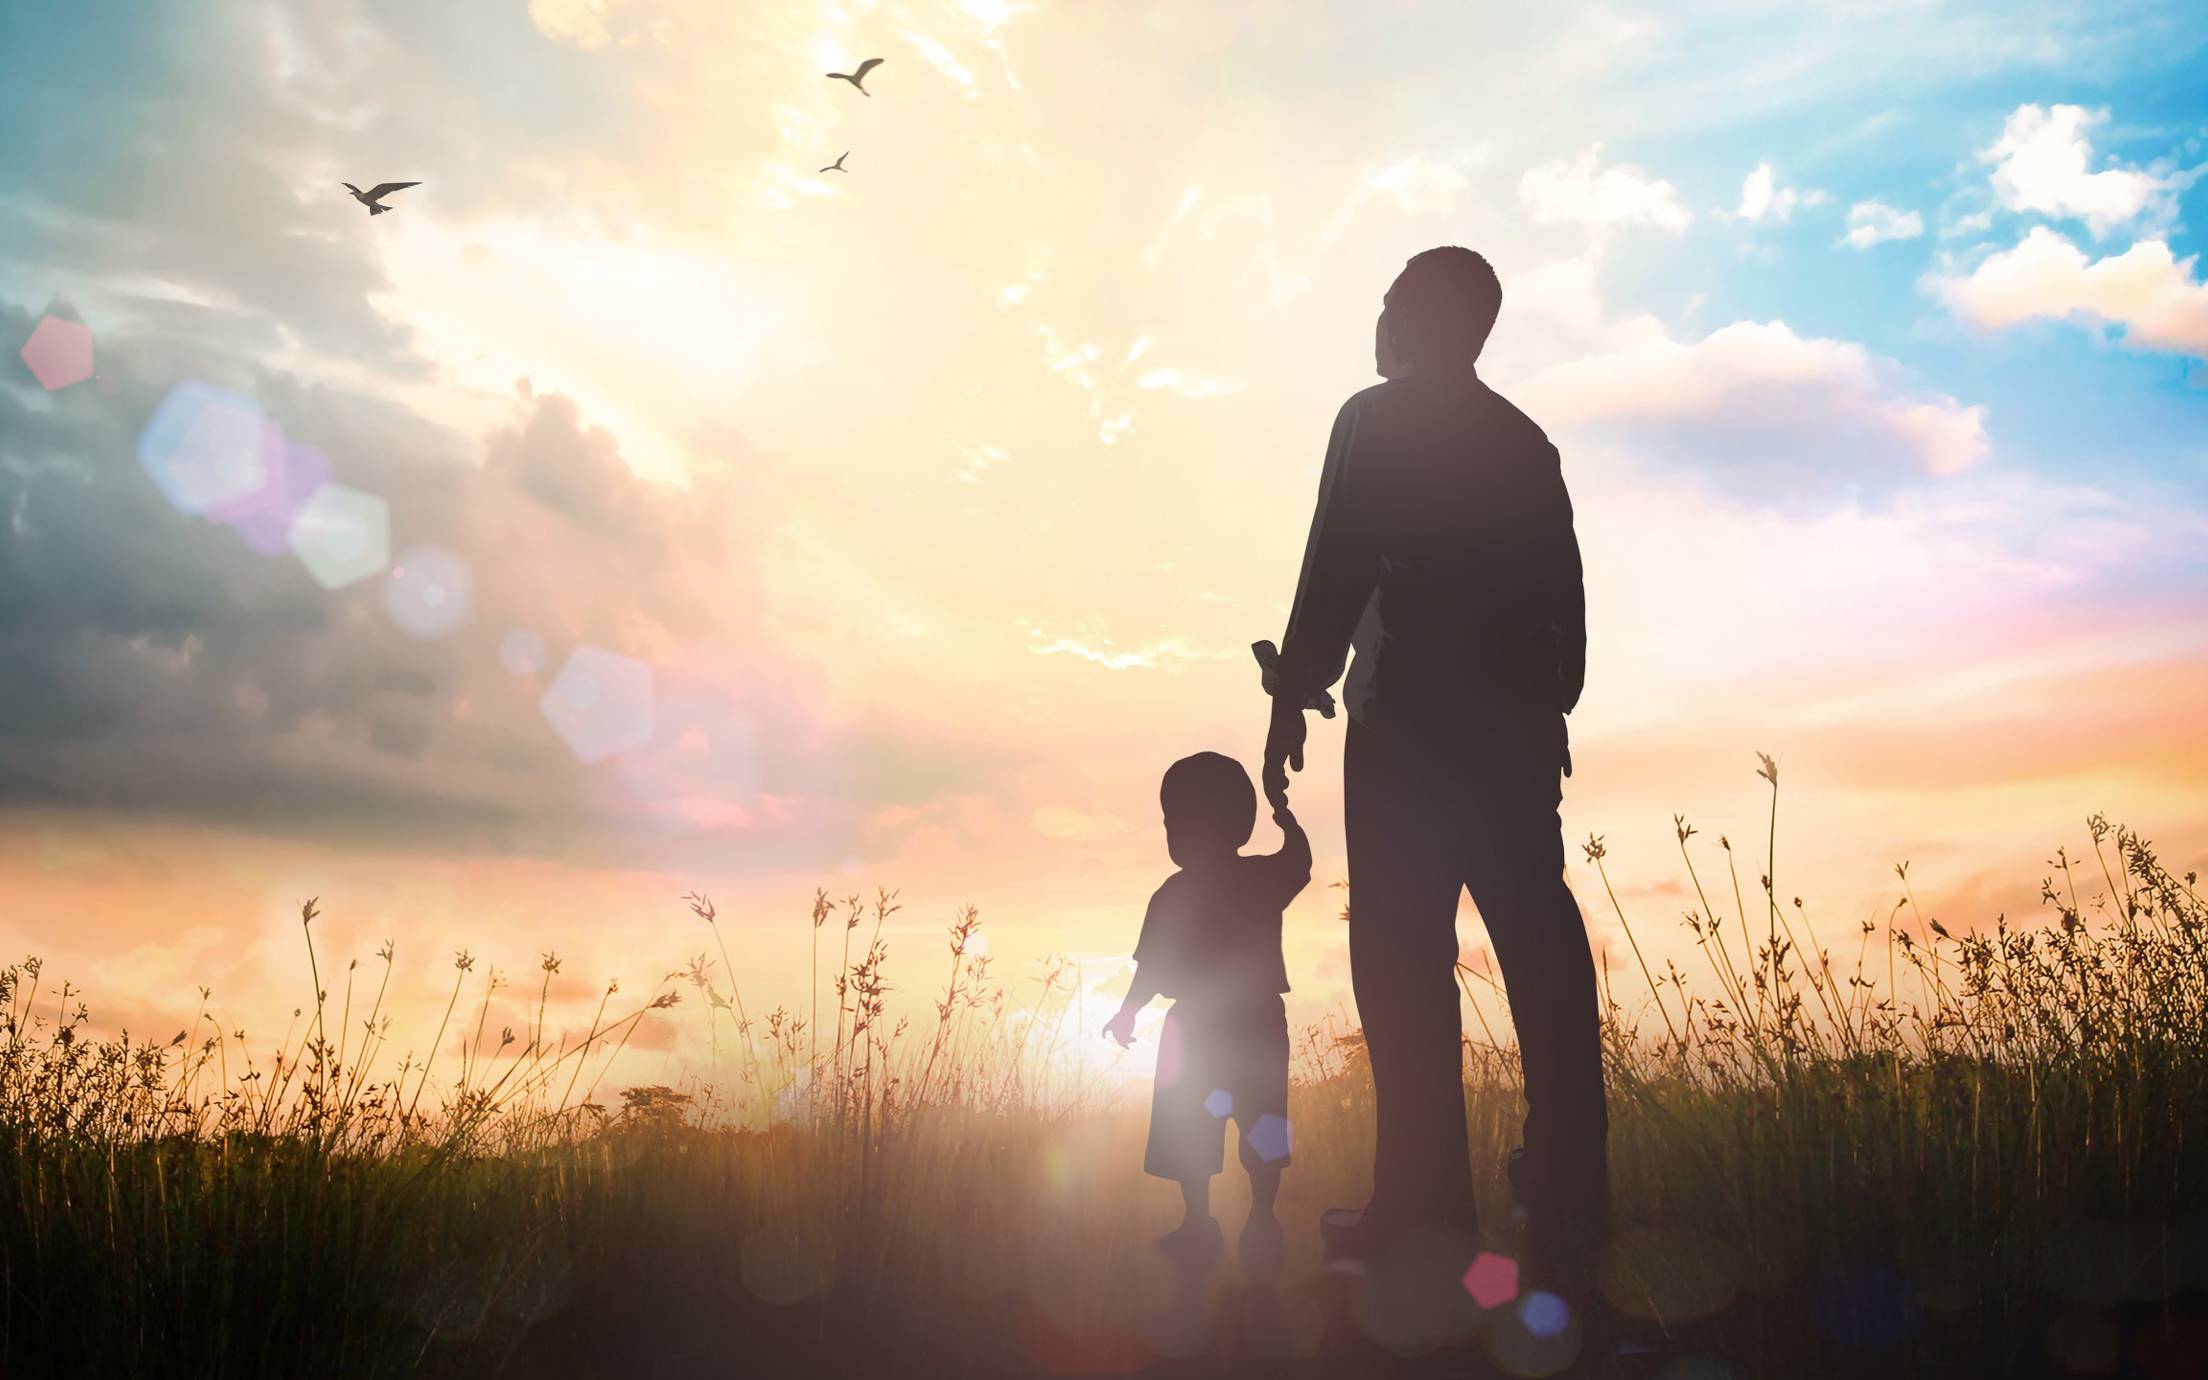 Father and son holding hands in a field as they look towards the sun